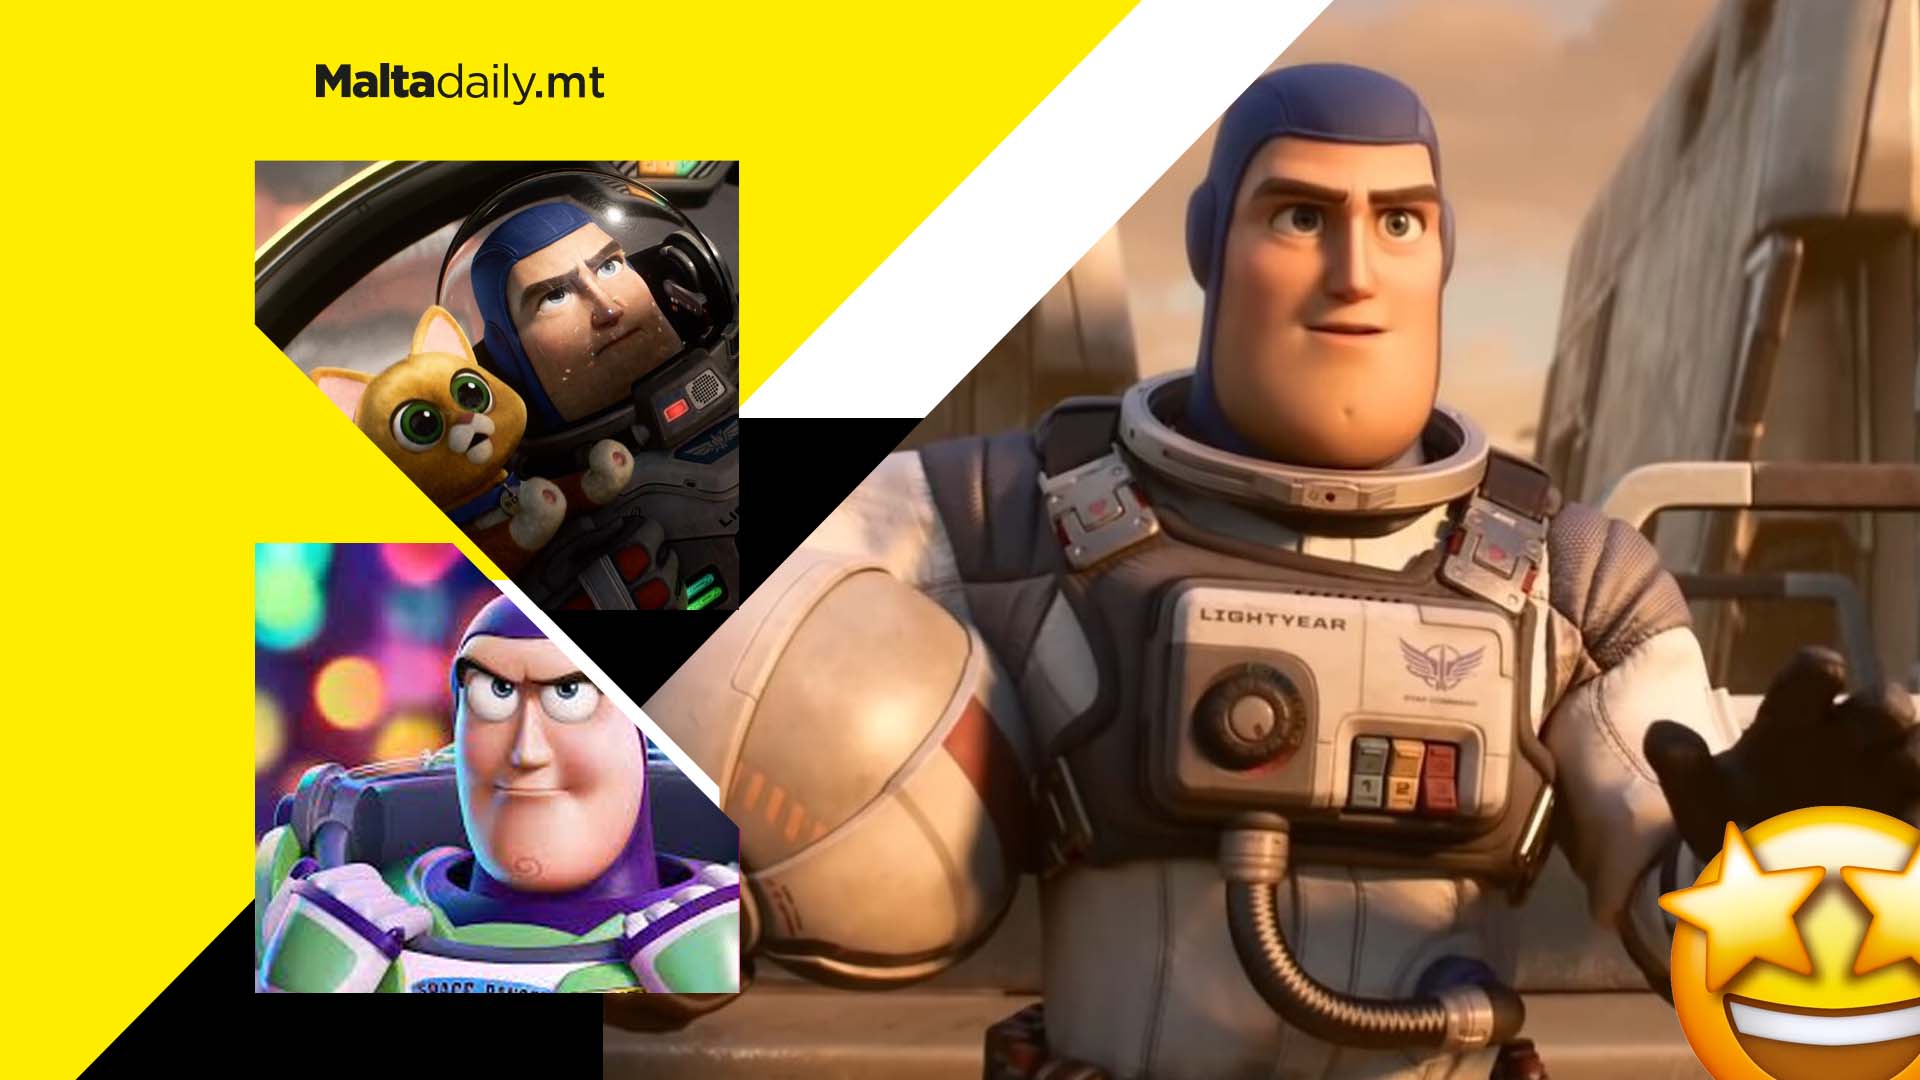 Official trailer for Disney and Pixar’s Lightyear finally drops